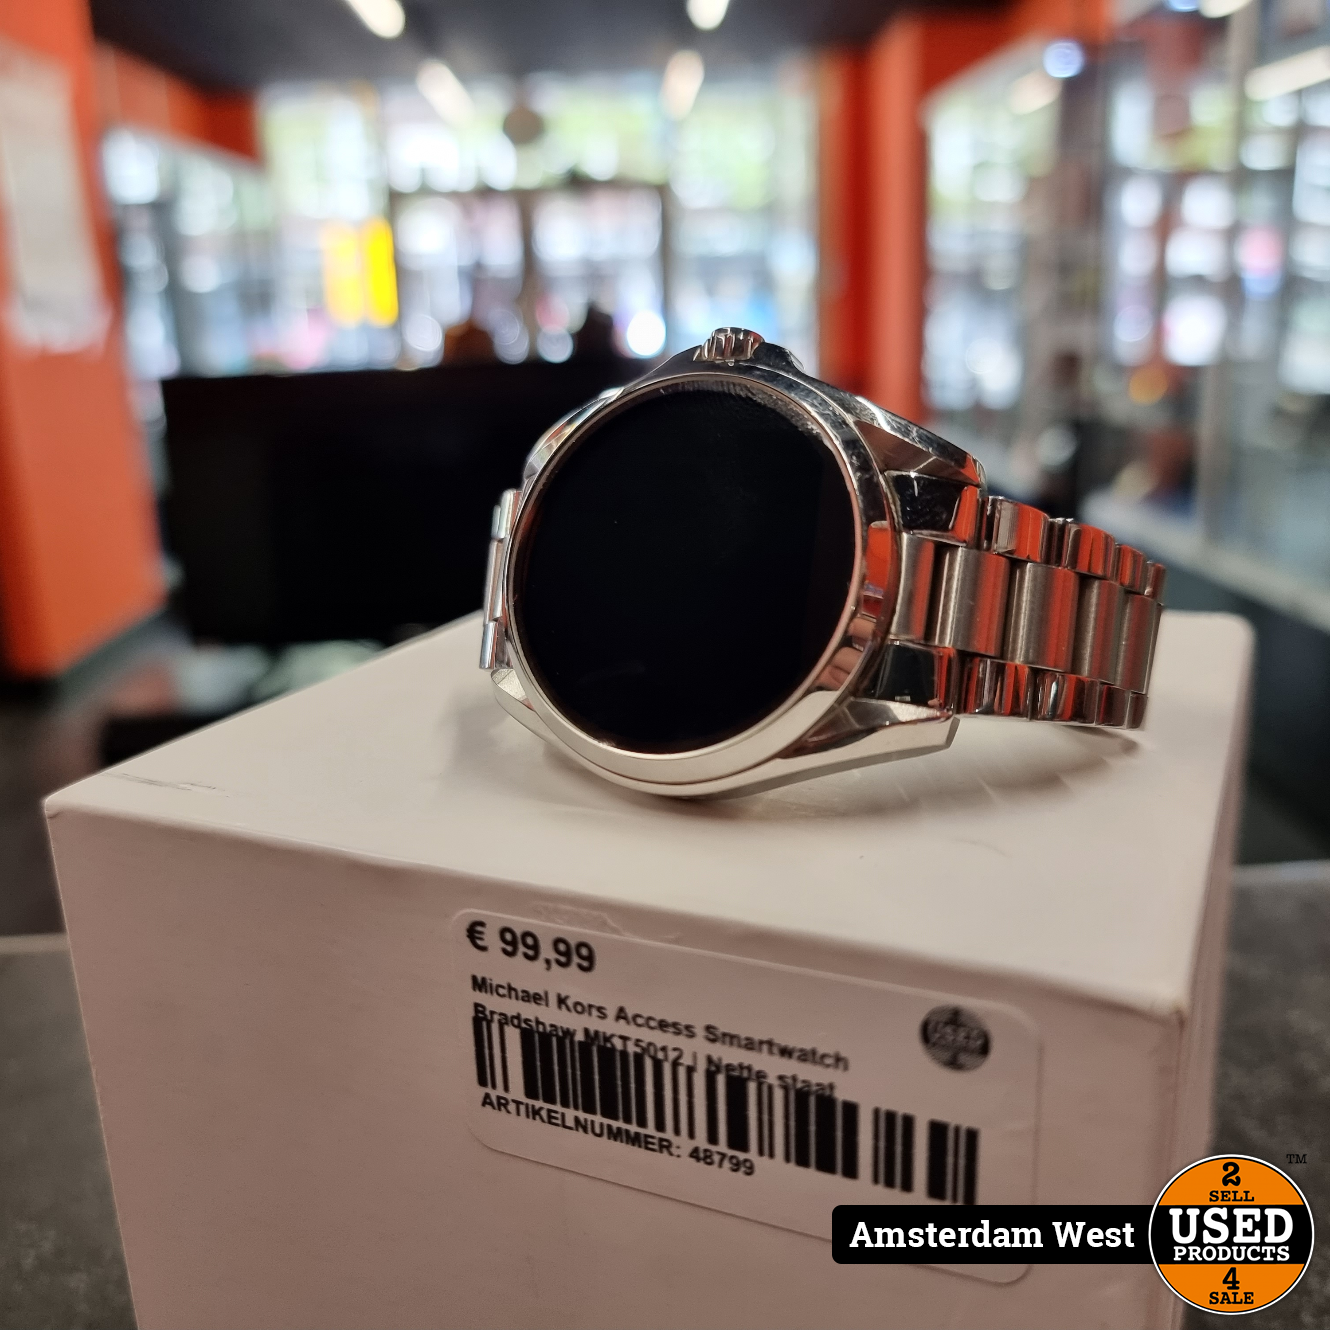 Michael Kors Access Smartwatch Bradshaw MKT5012  Nette staat  Used  Products Amsterdam West